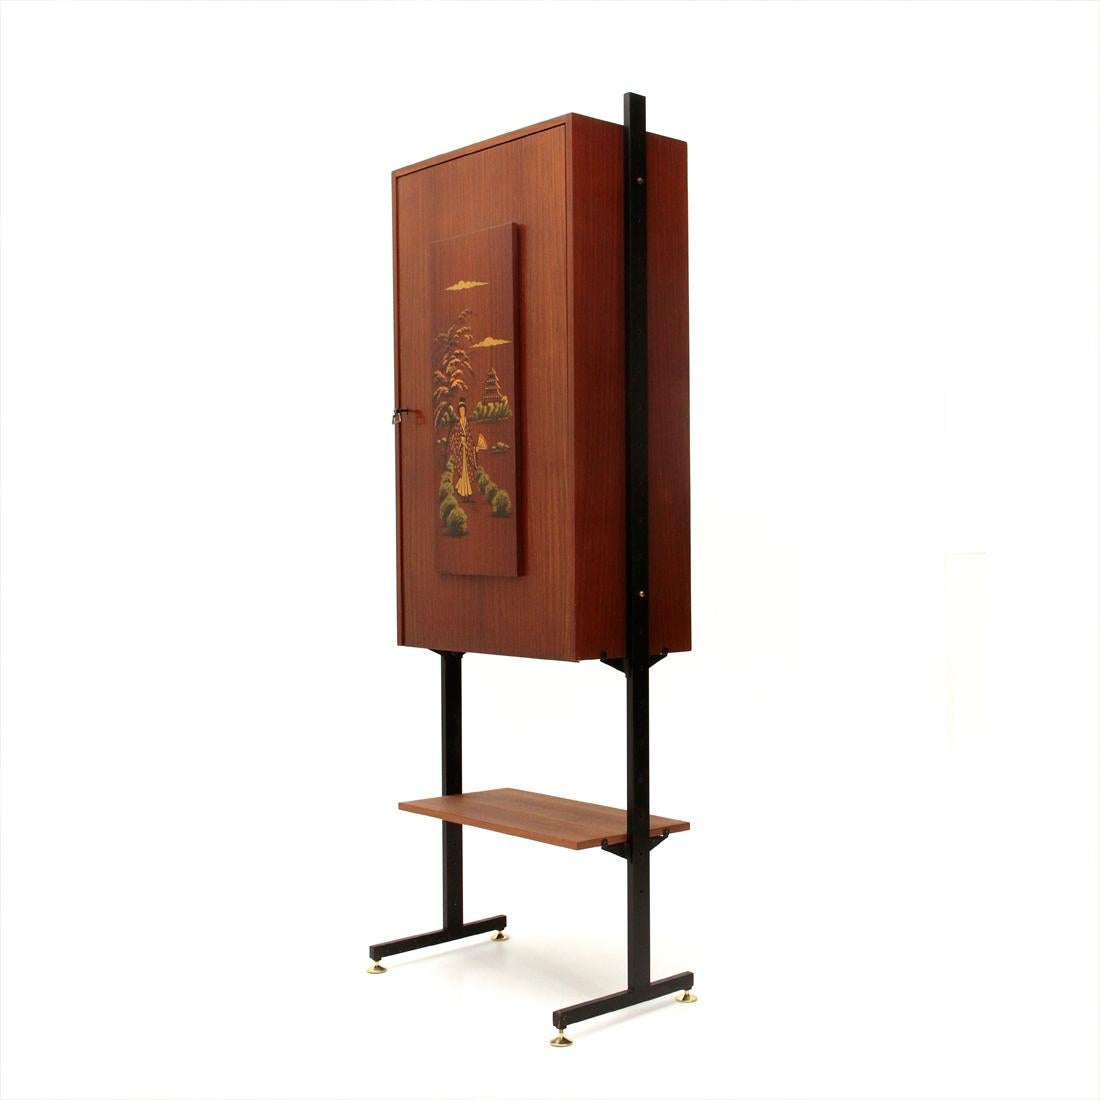 Italian desk cabinet produced in the 1950s.
Uprights in black painted metal with adjustable brass foot.
Teak veneered wood cabinet with flap opening that becomes a desk top.
Panel with oriental decoration that becomes the foot of the desk.
Teak